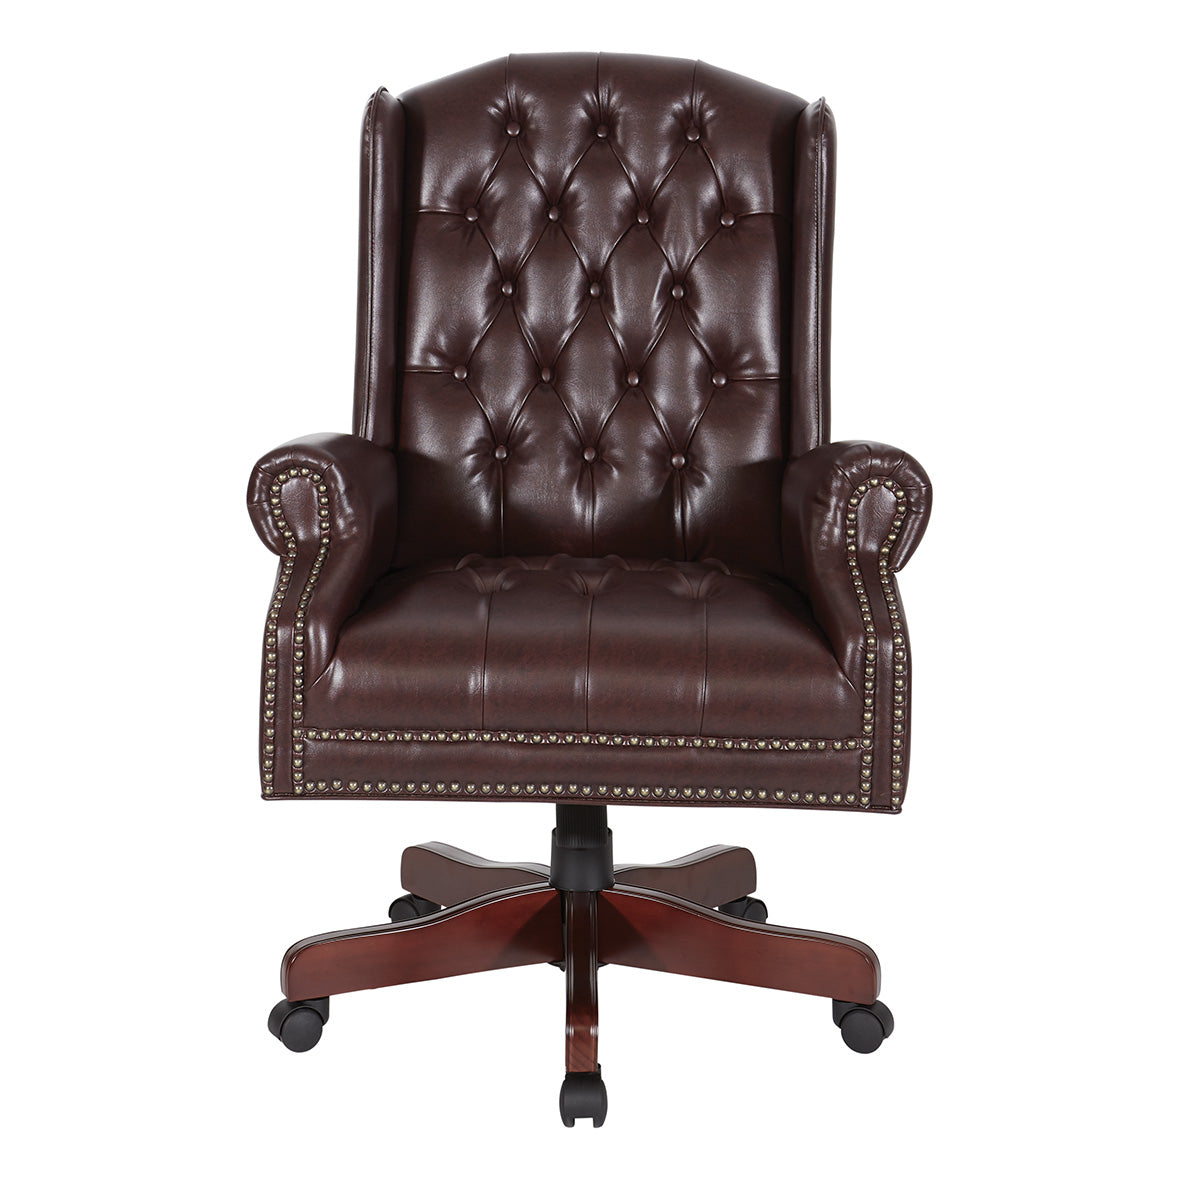 TEX220 - Deluxe High Back Traditional Executive Chair  by Office Star